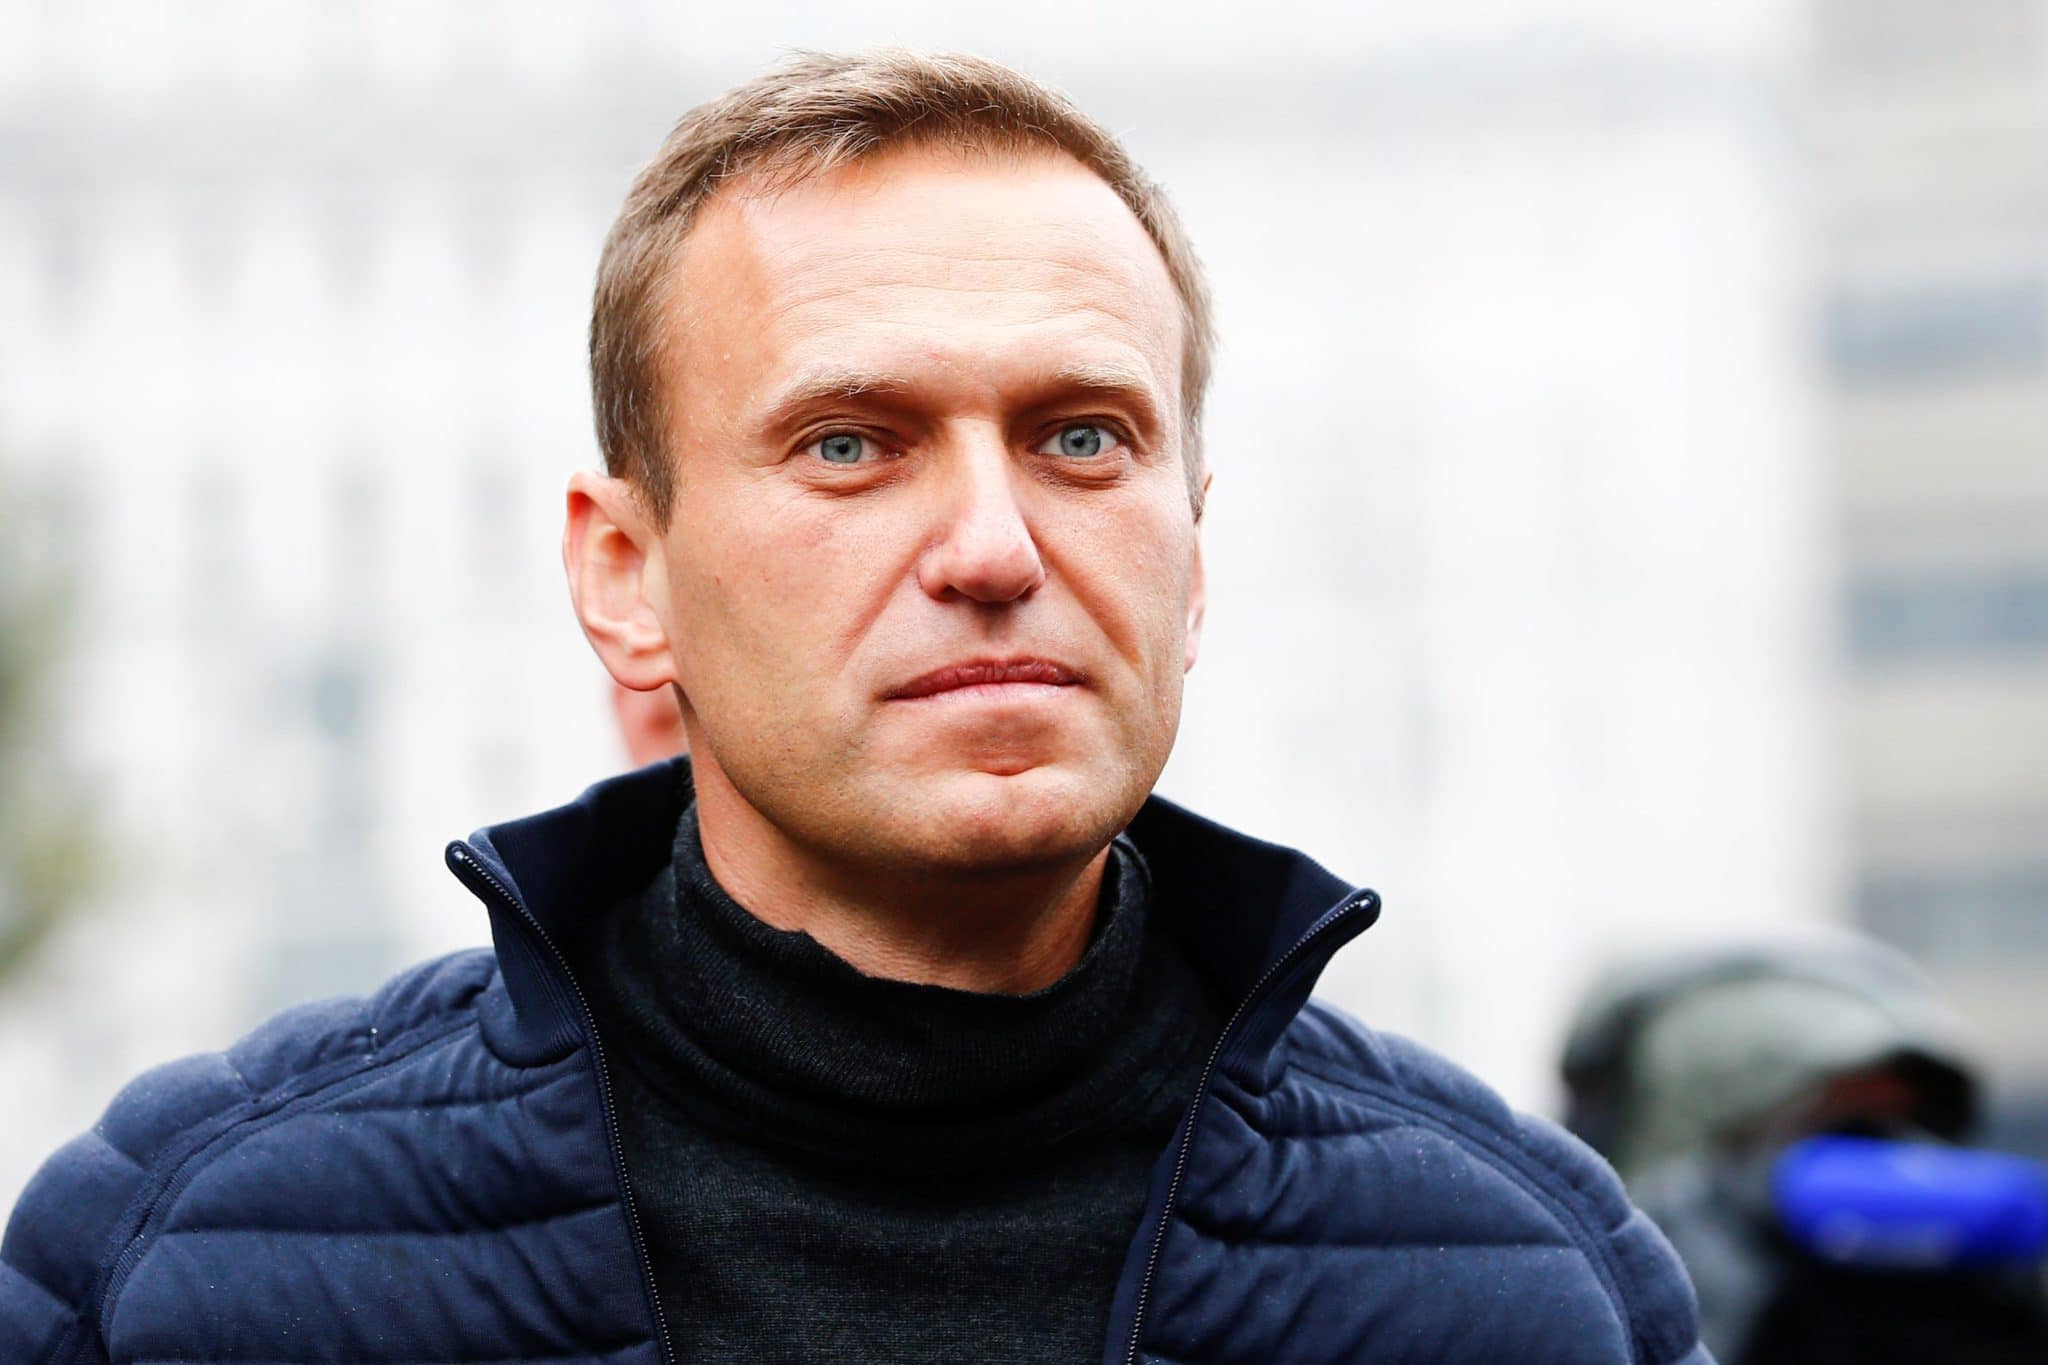 Alexei Navalny, who was poisoned in a botched assassination attempt in August 2020, was jailed last month for breaching the terms of his probation 